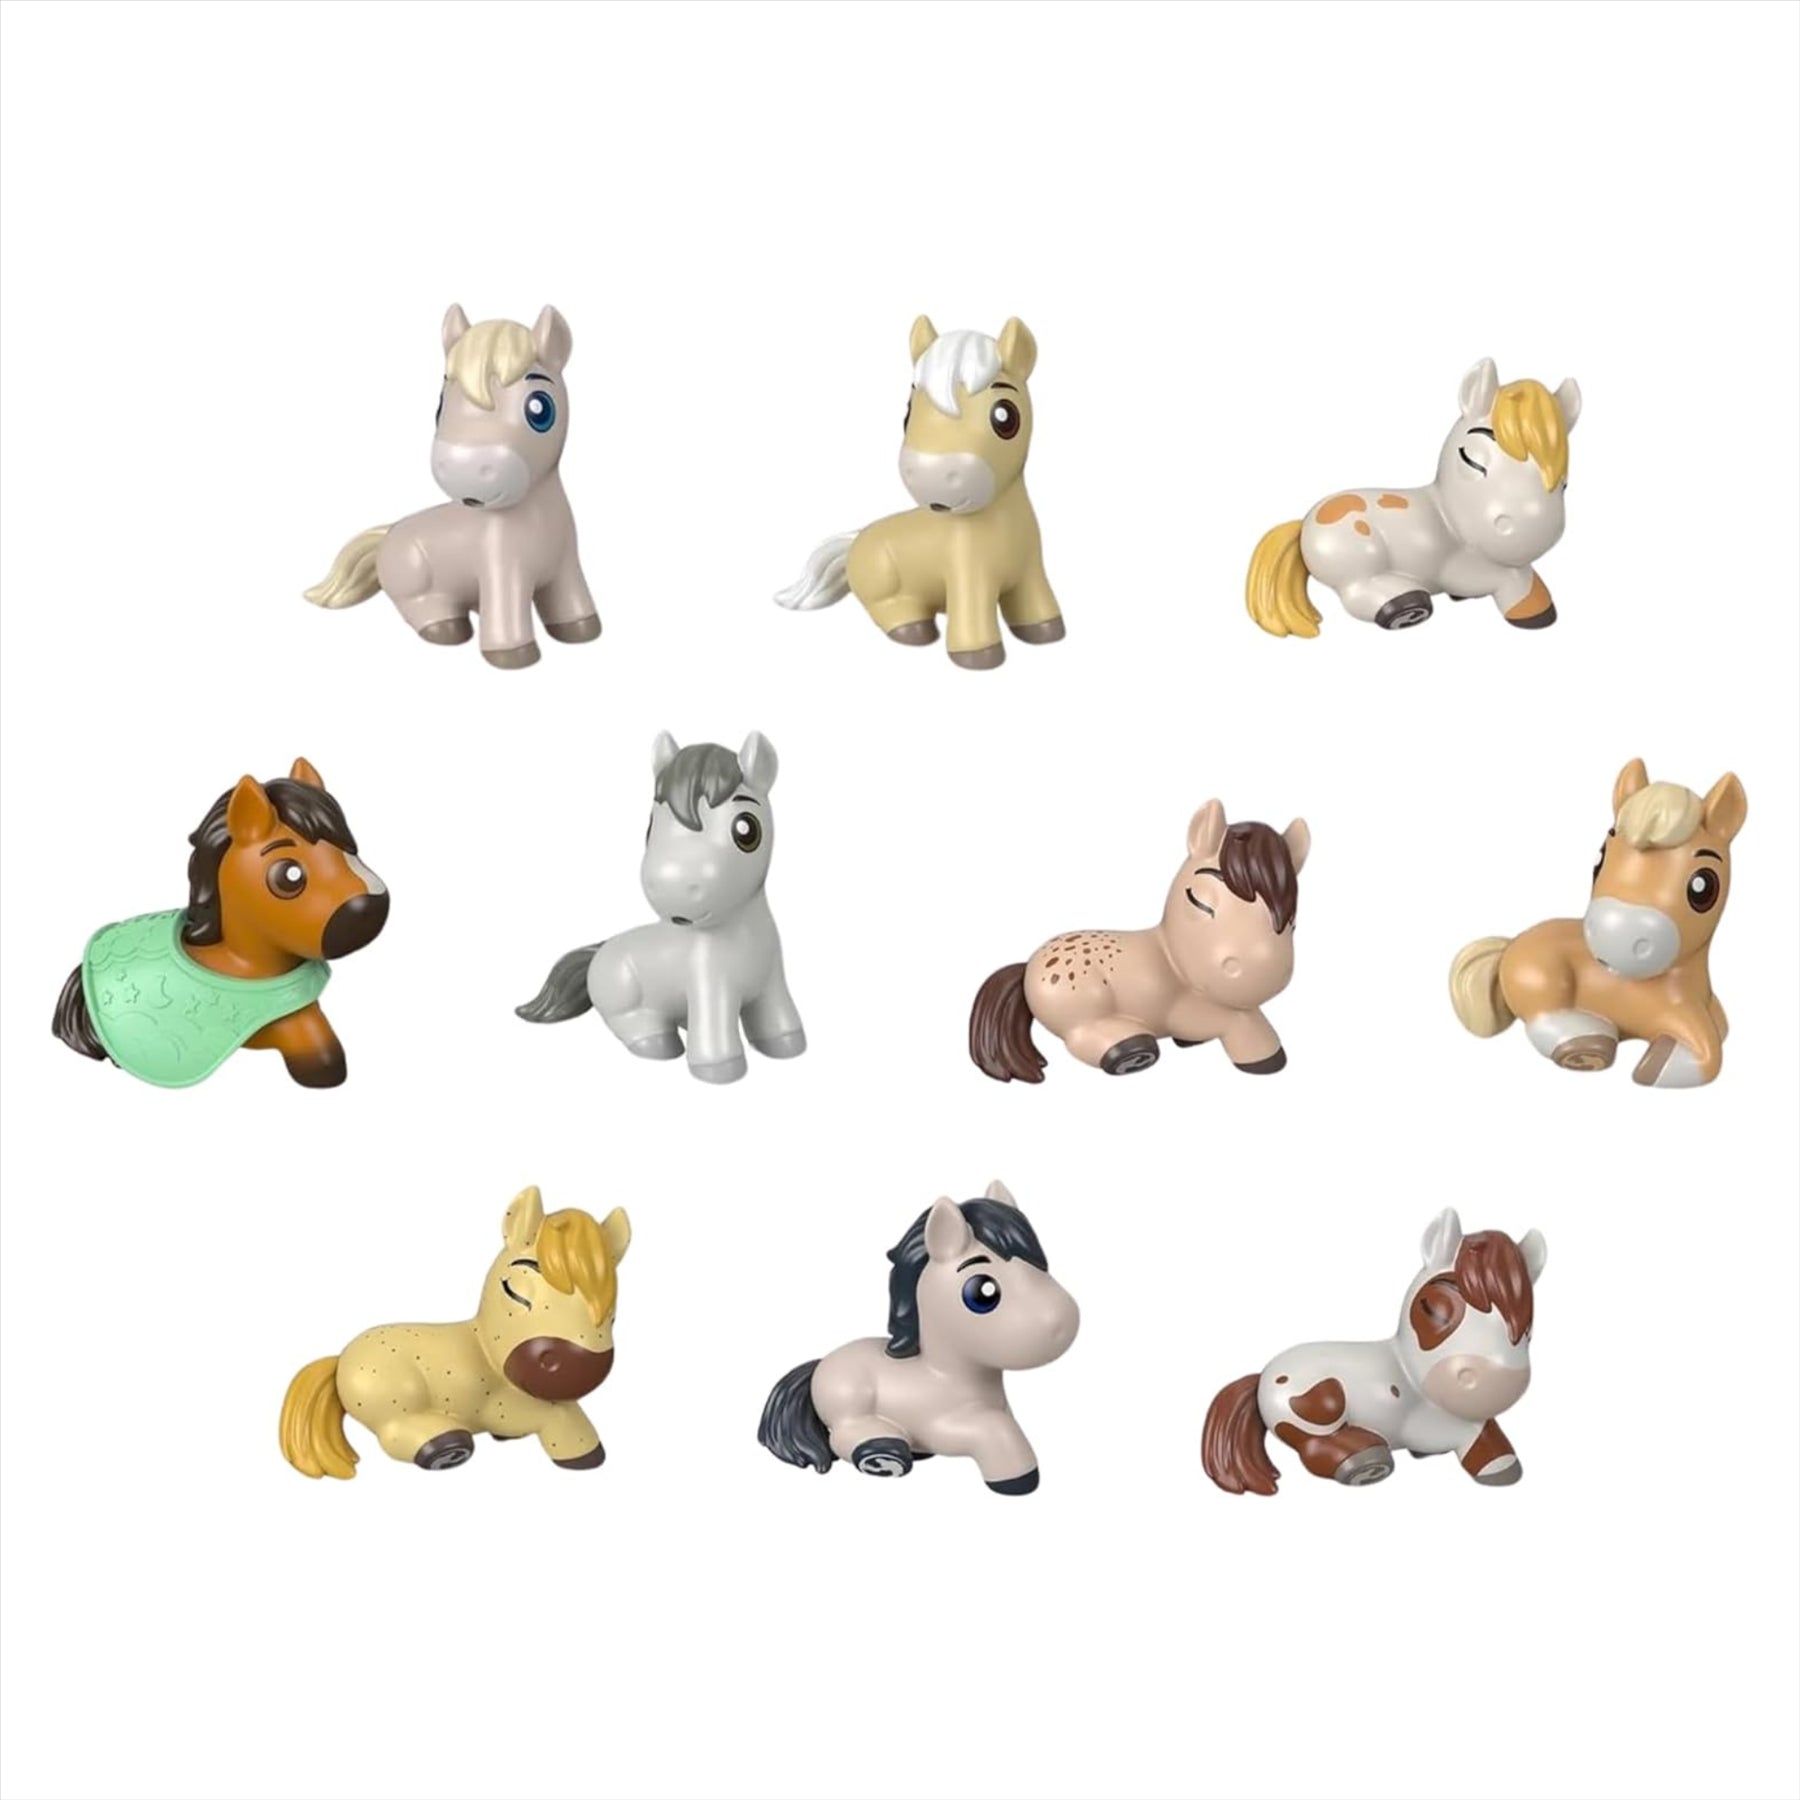 Spirit Untamed Minis - Precious Ponies Series 3 Blind Bag Party Favours - Guaranteed no Duplicates - Complete Set of All 10 Figures - Toptoys2u